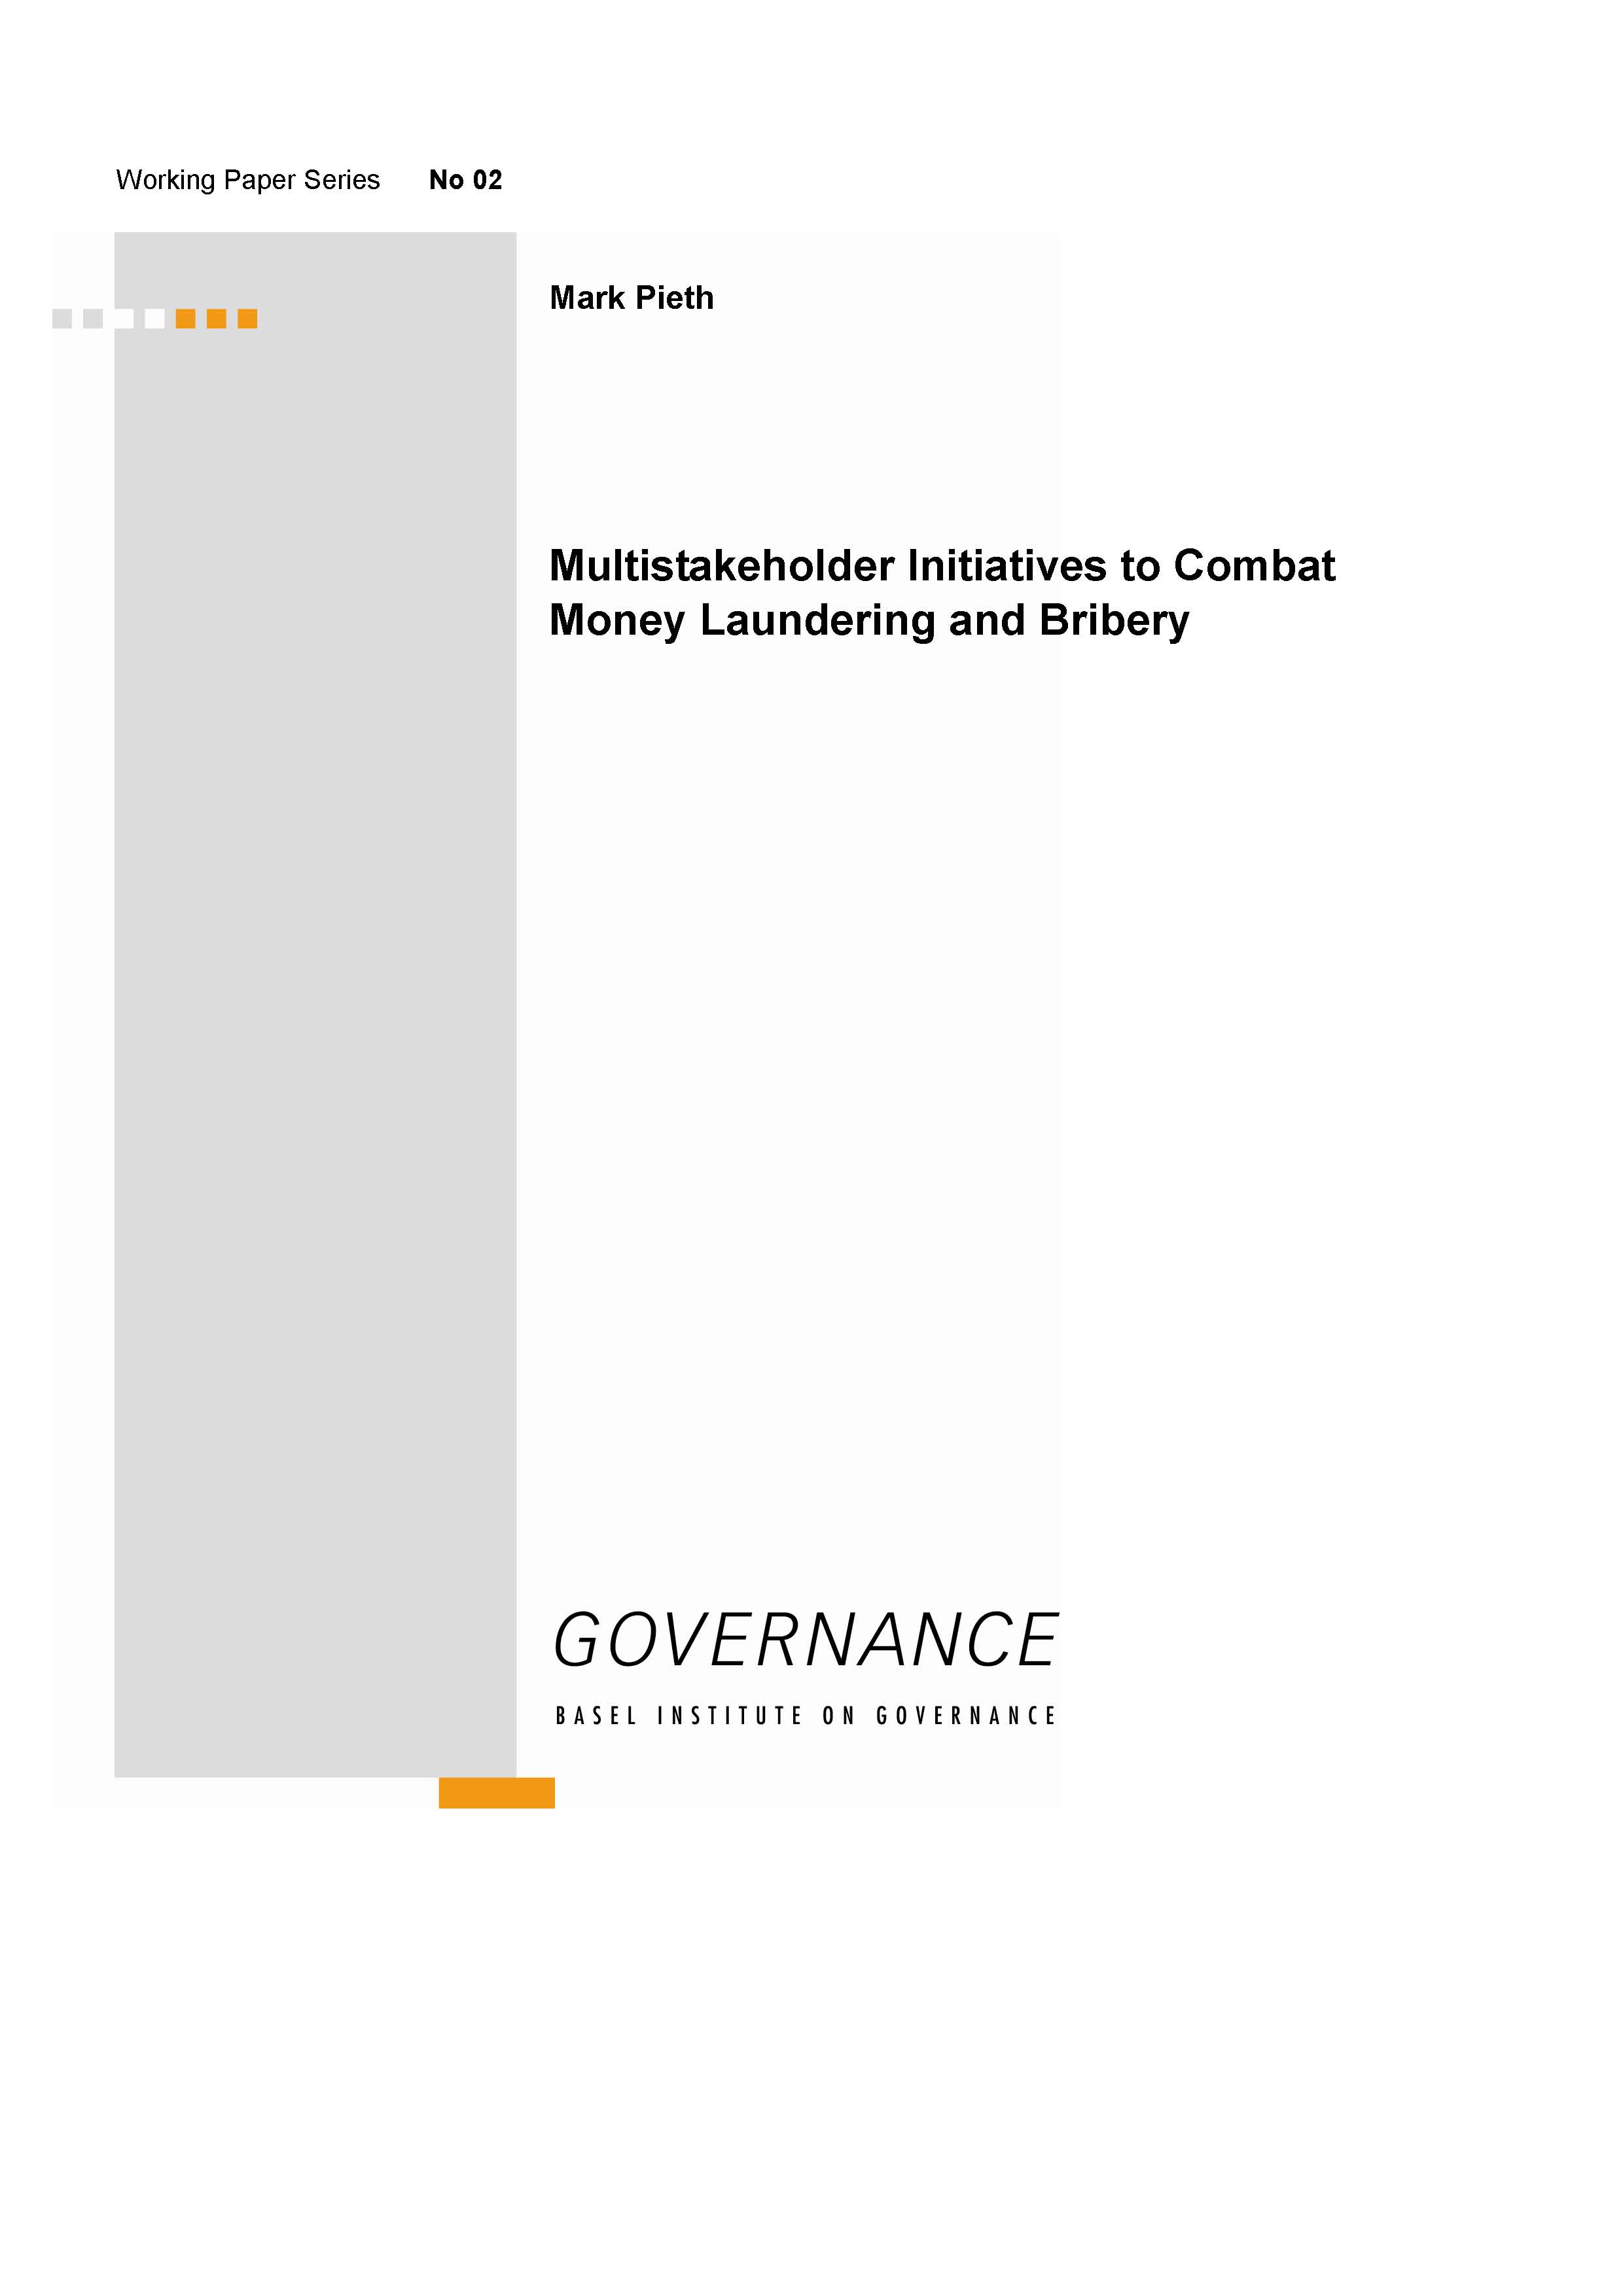 Cover page of Working Paper 20